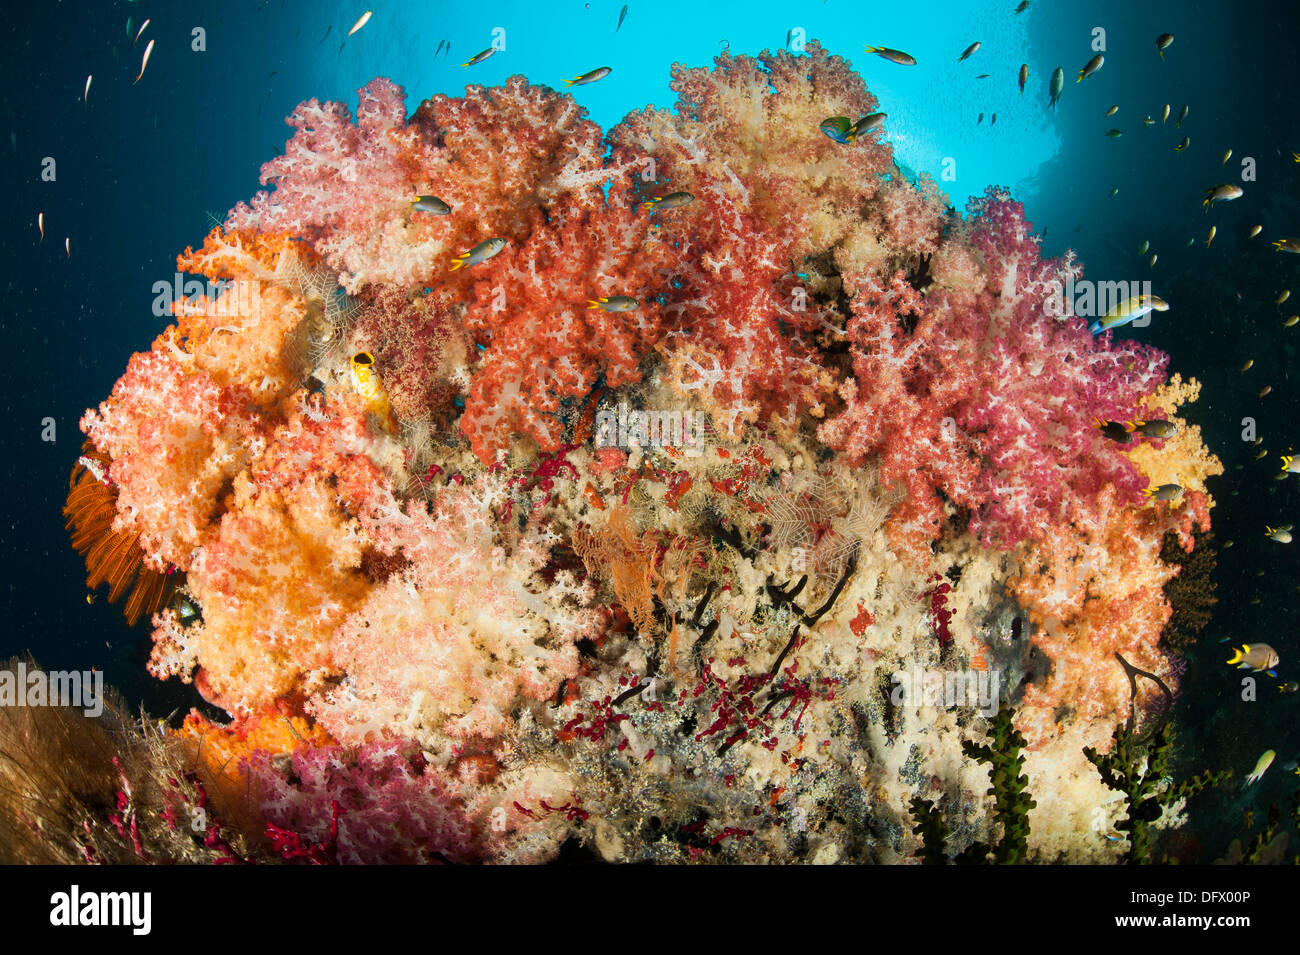 A dead table coral, now covered in healthy soft corals, taken at Neptune Fan Sea, Raja Ampat, West Papua, Indonesia. Stock Photo